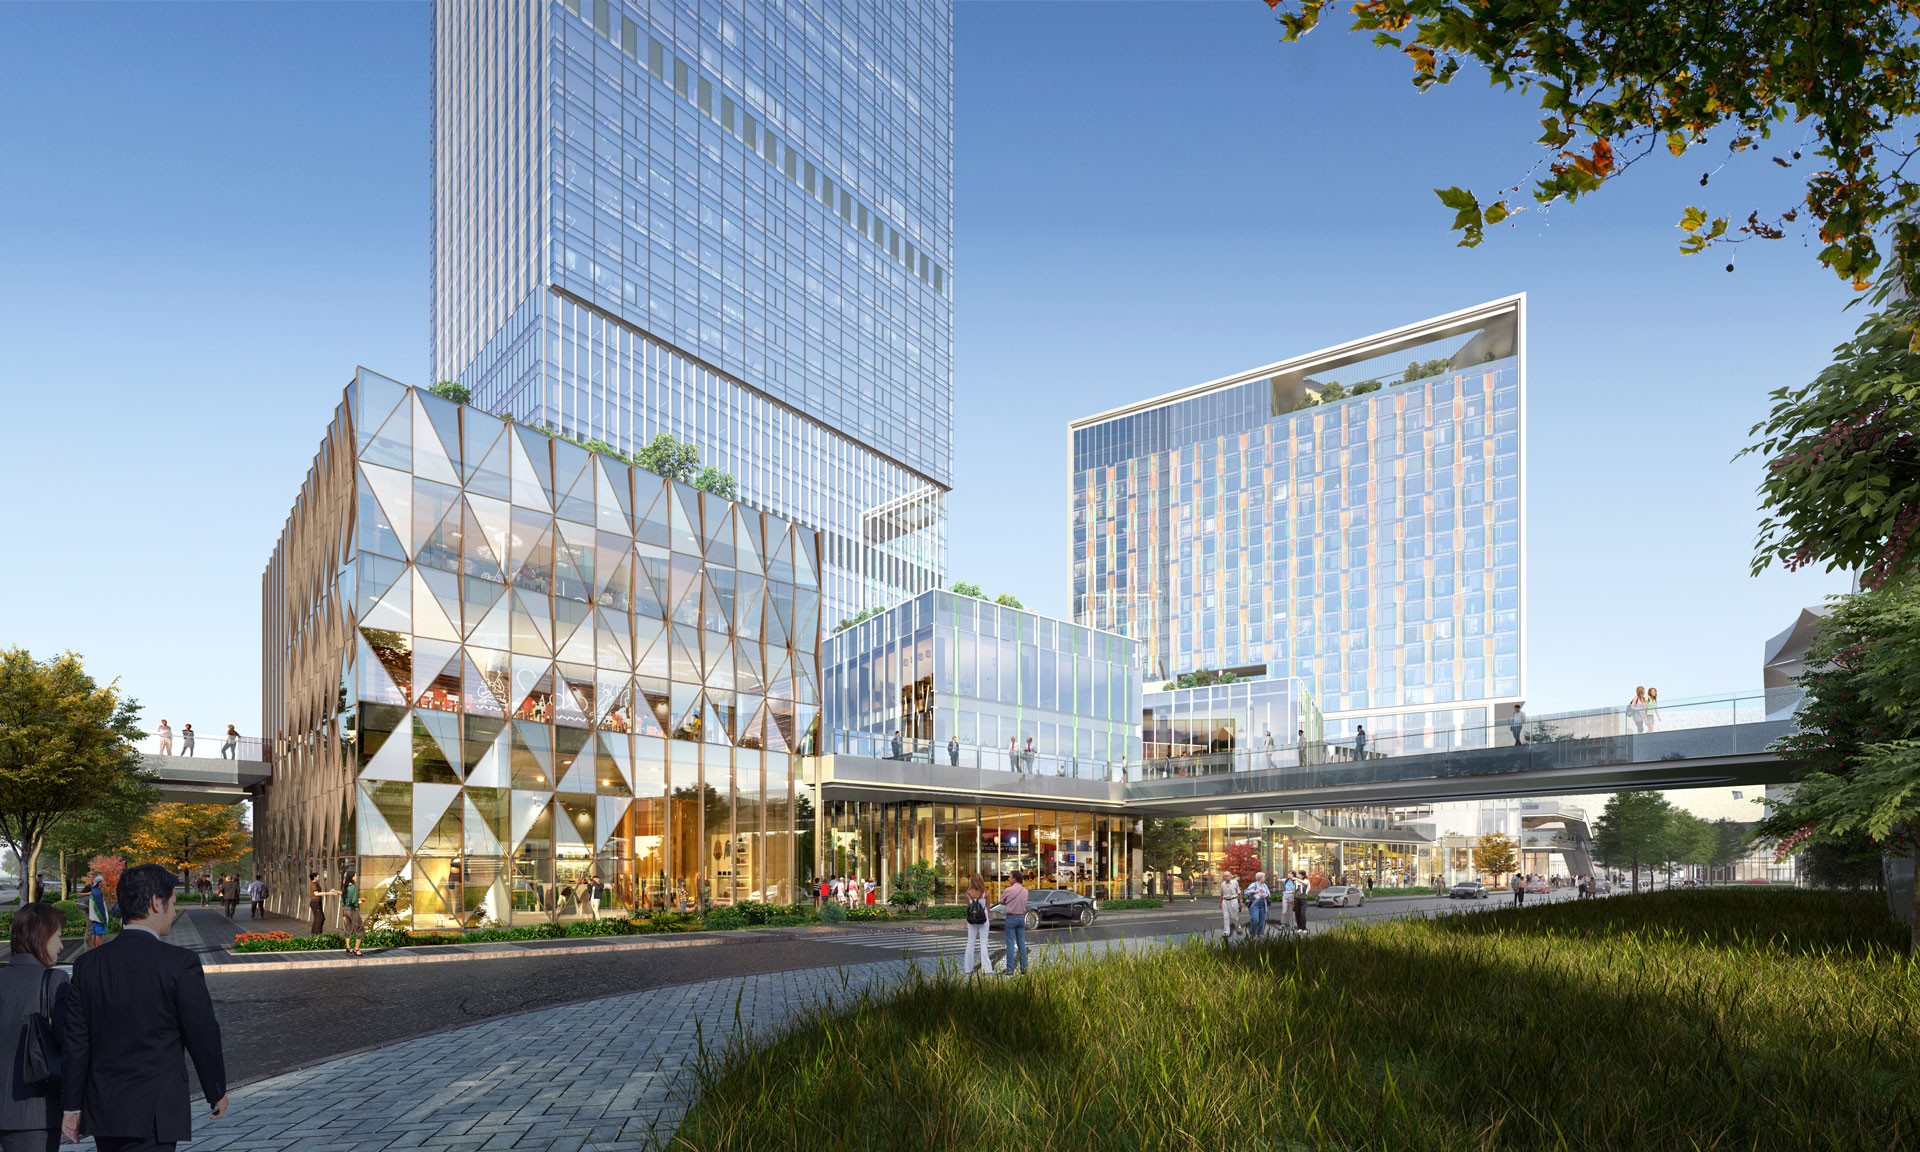 3D Still Renderings for Large Scale Public Building Project in China, designed by NBBJ from USA